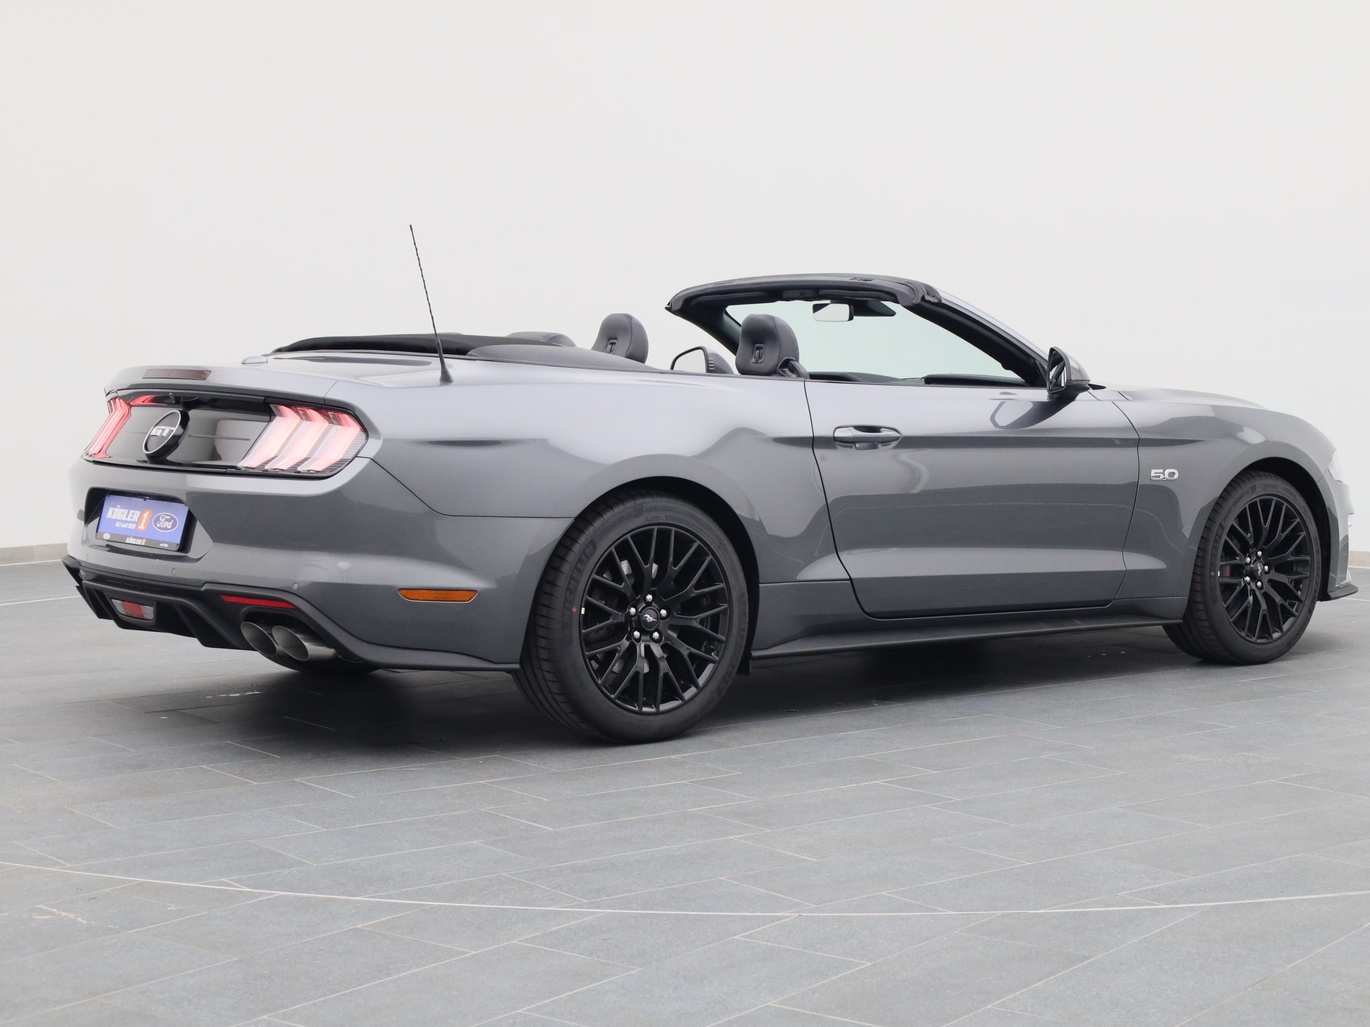  Ford Mustang GT Cabrio V8 450PS Aut. / Premium 2 in Carbonized Gray 